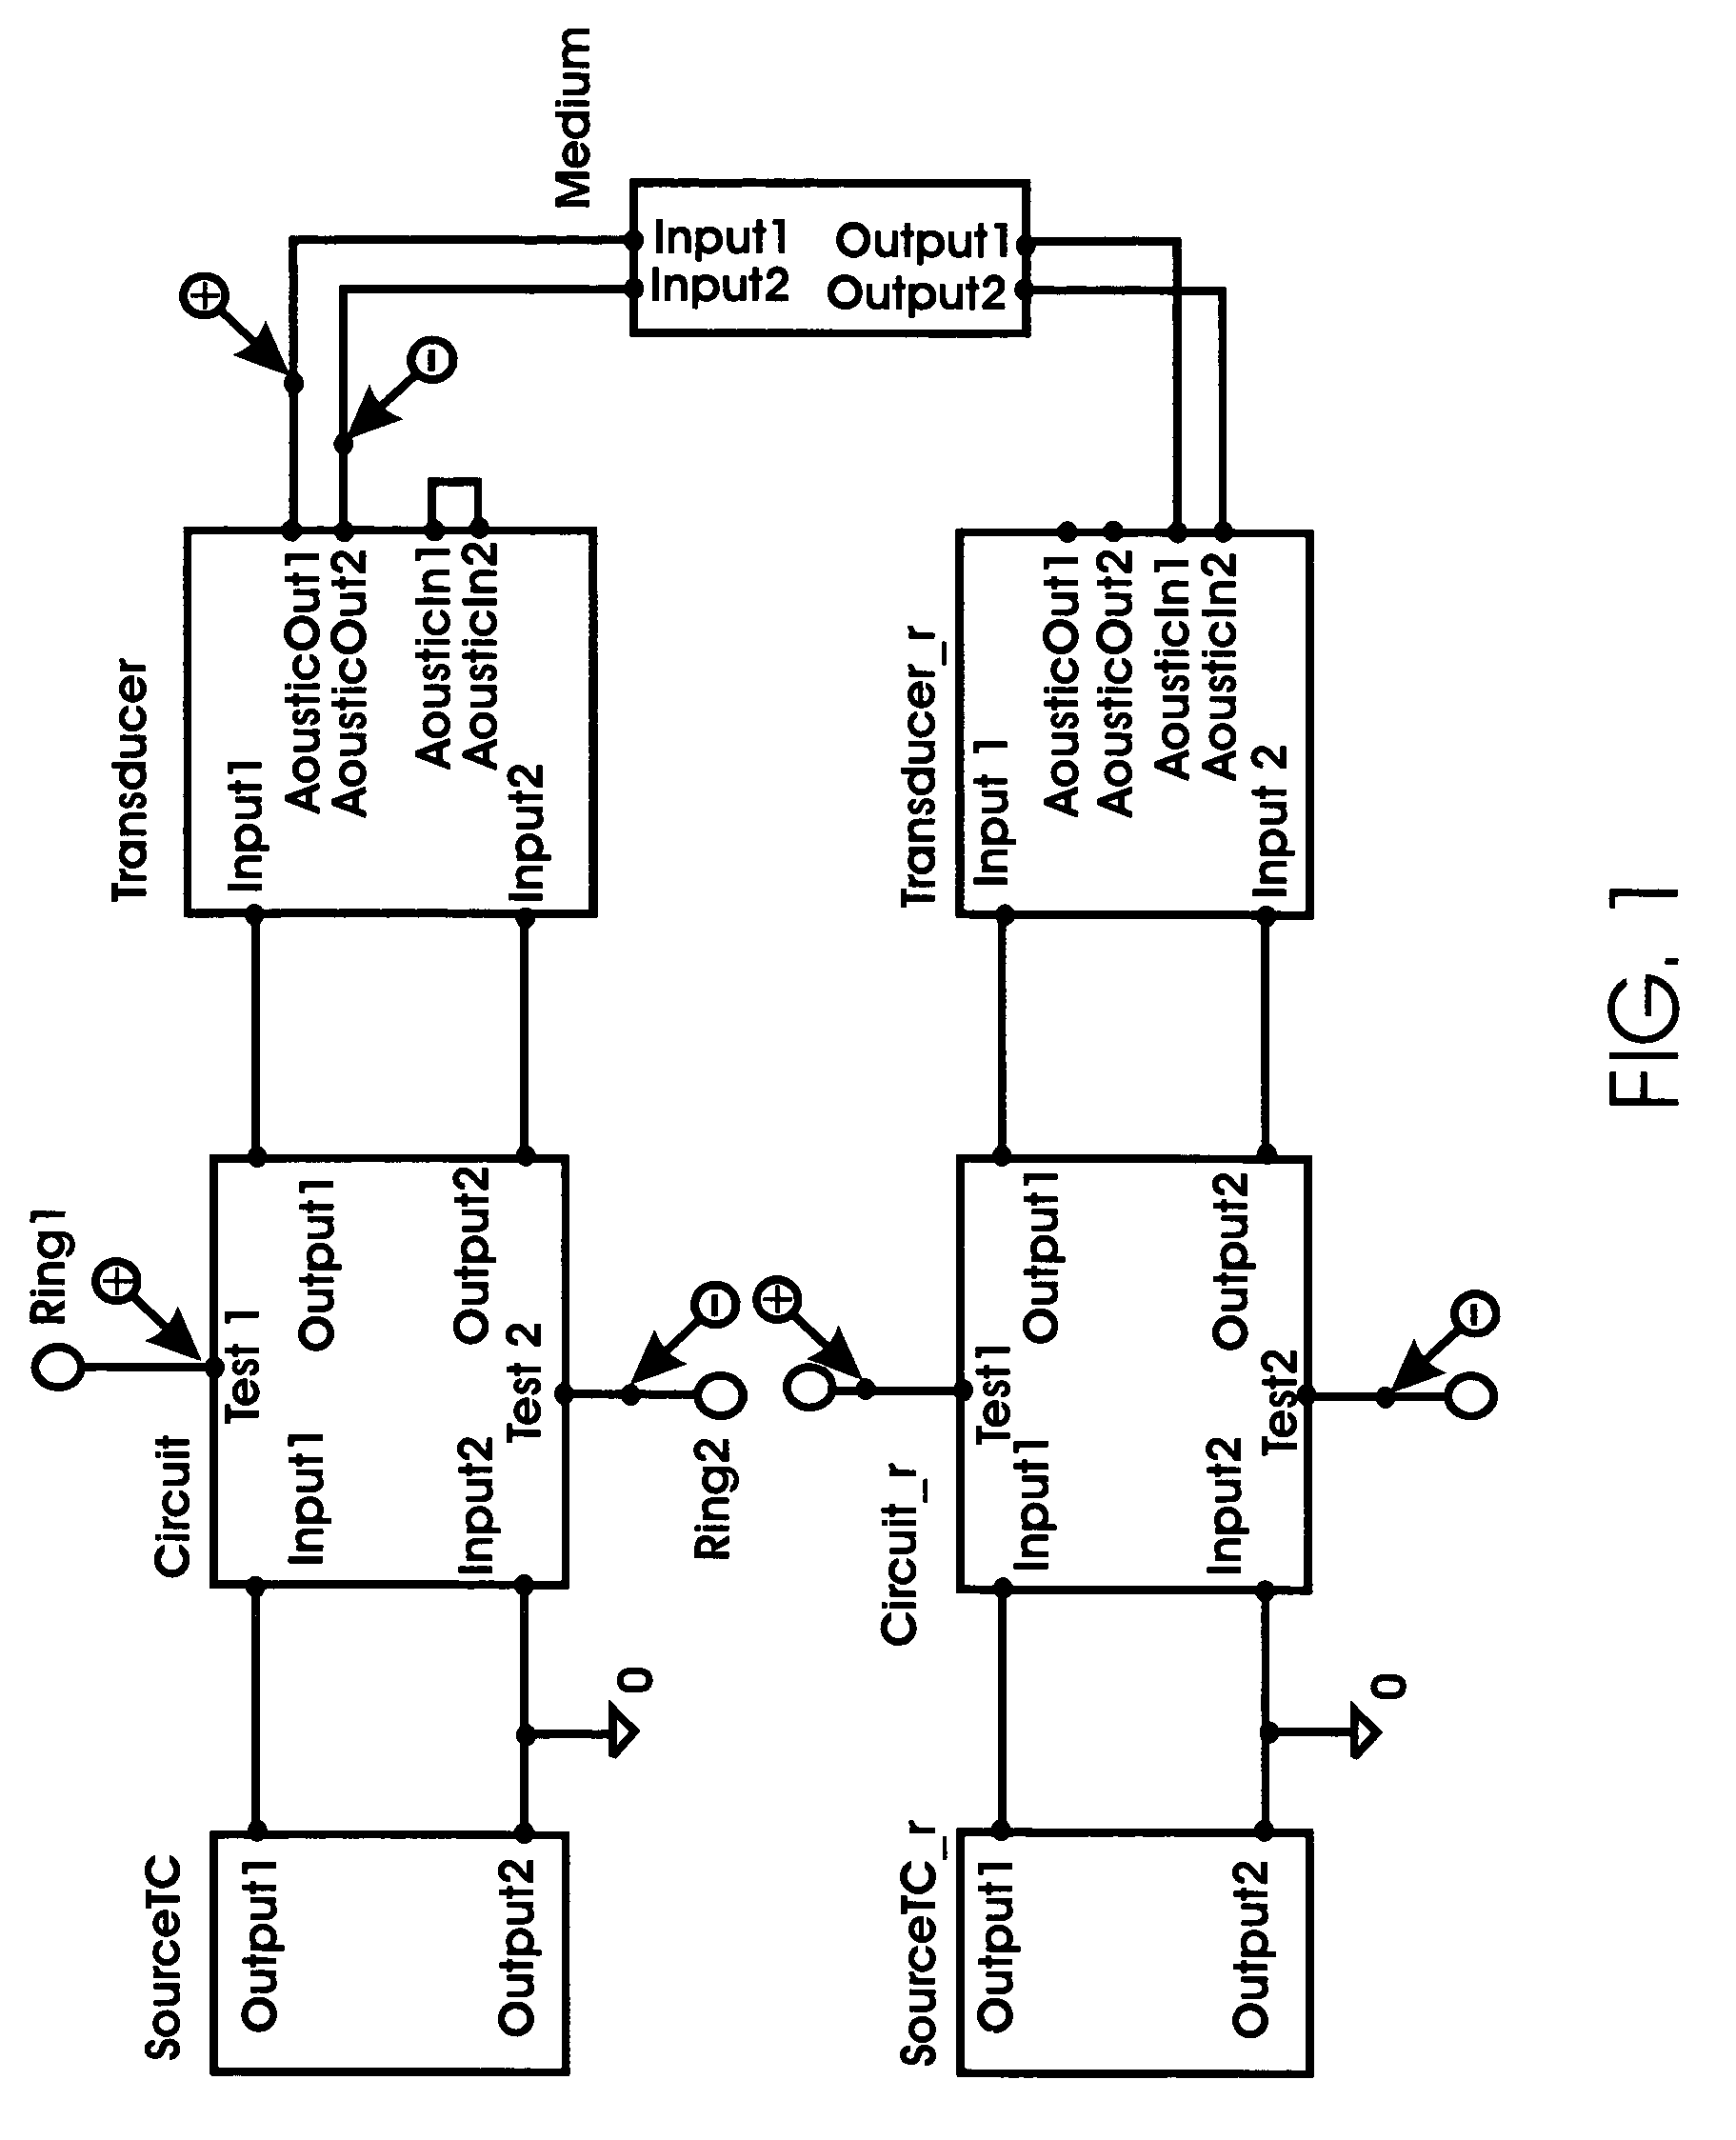 System and method for eliminating audible noise for ultrasonic transducers